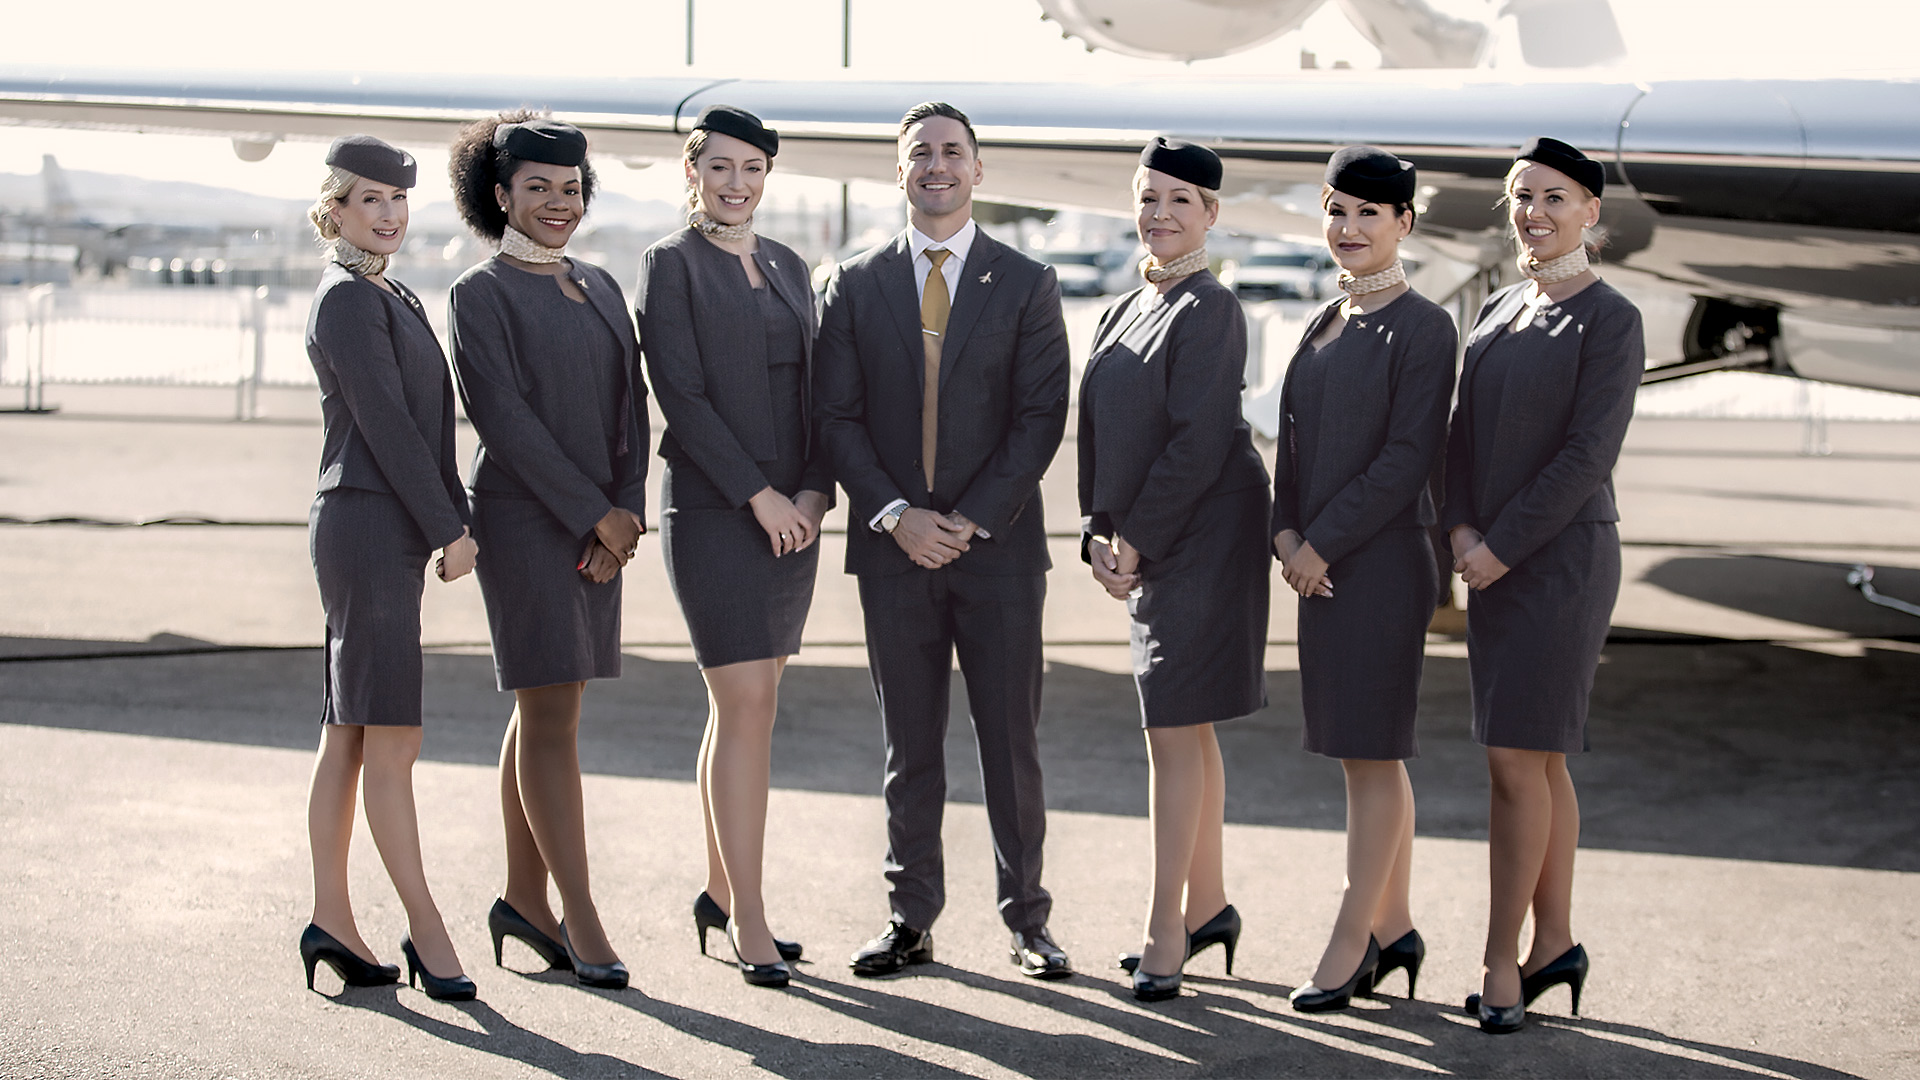 Group of flight attendants standing together in front of an aircraft